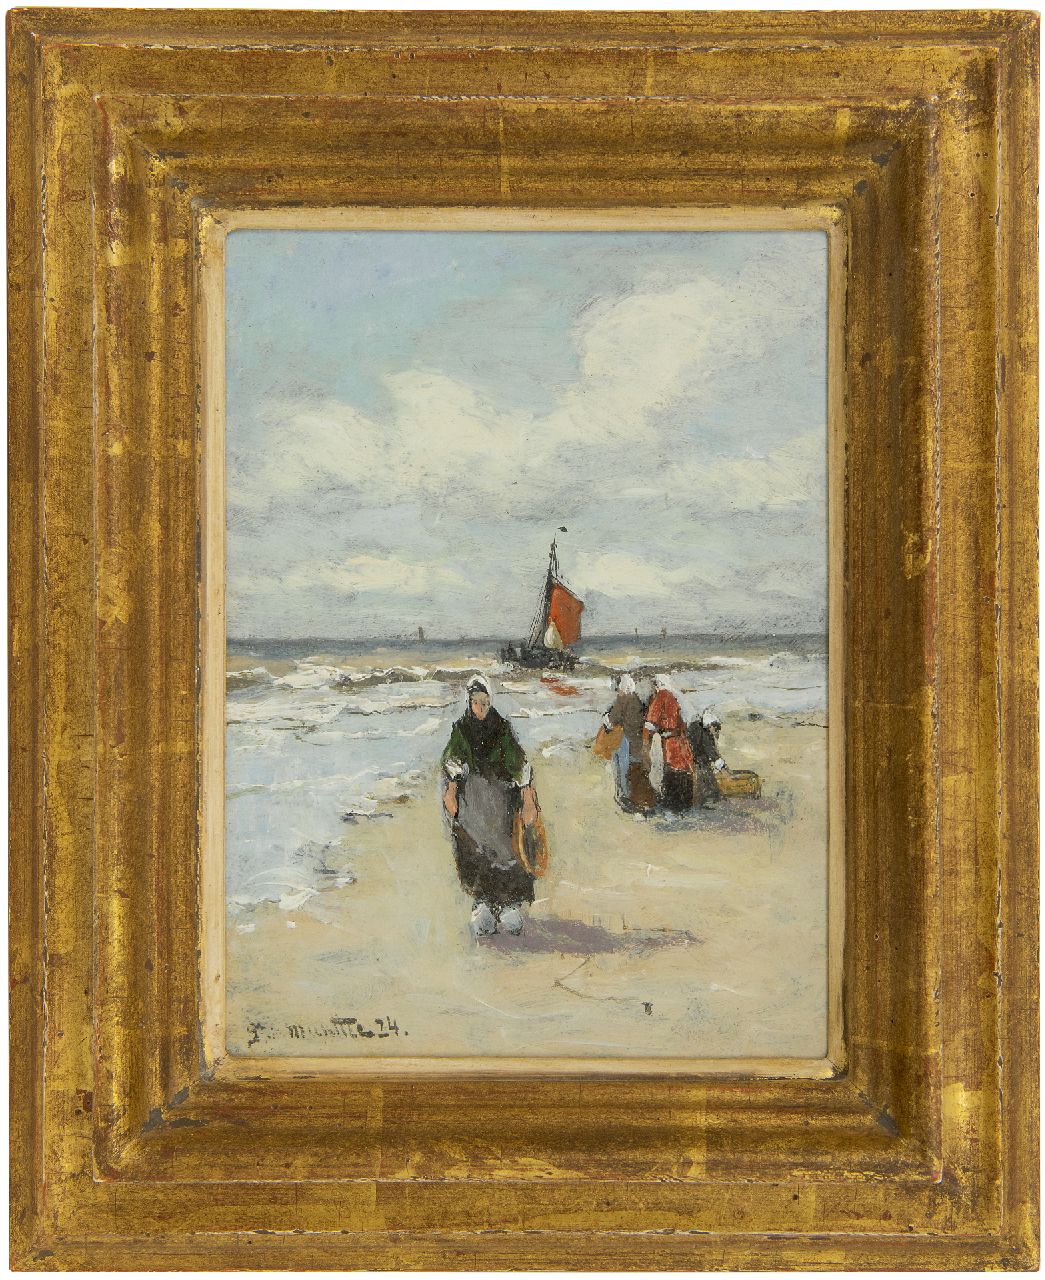 Munthe G.A.L.  | Gerhard Arij Ludwig 'Morgenstjerne' Munthe, Fisherman's wives on the beach, oil on board 20.0 x 15.0 cm, signed l.l. and dated '24